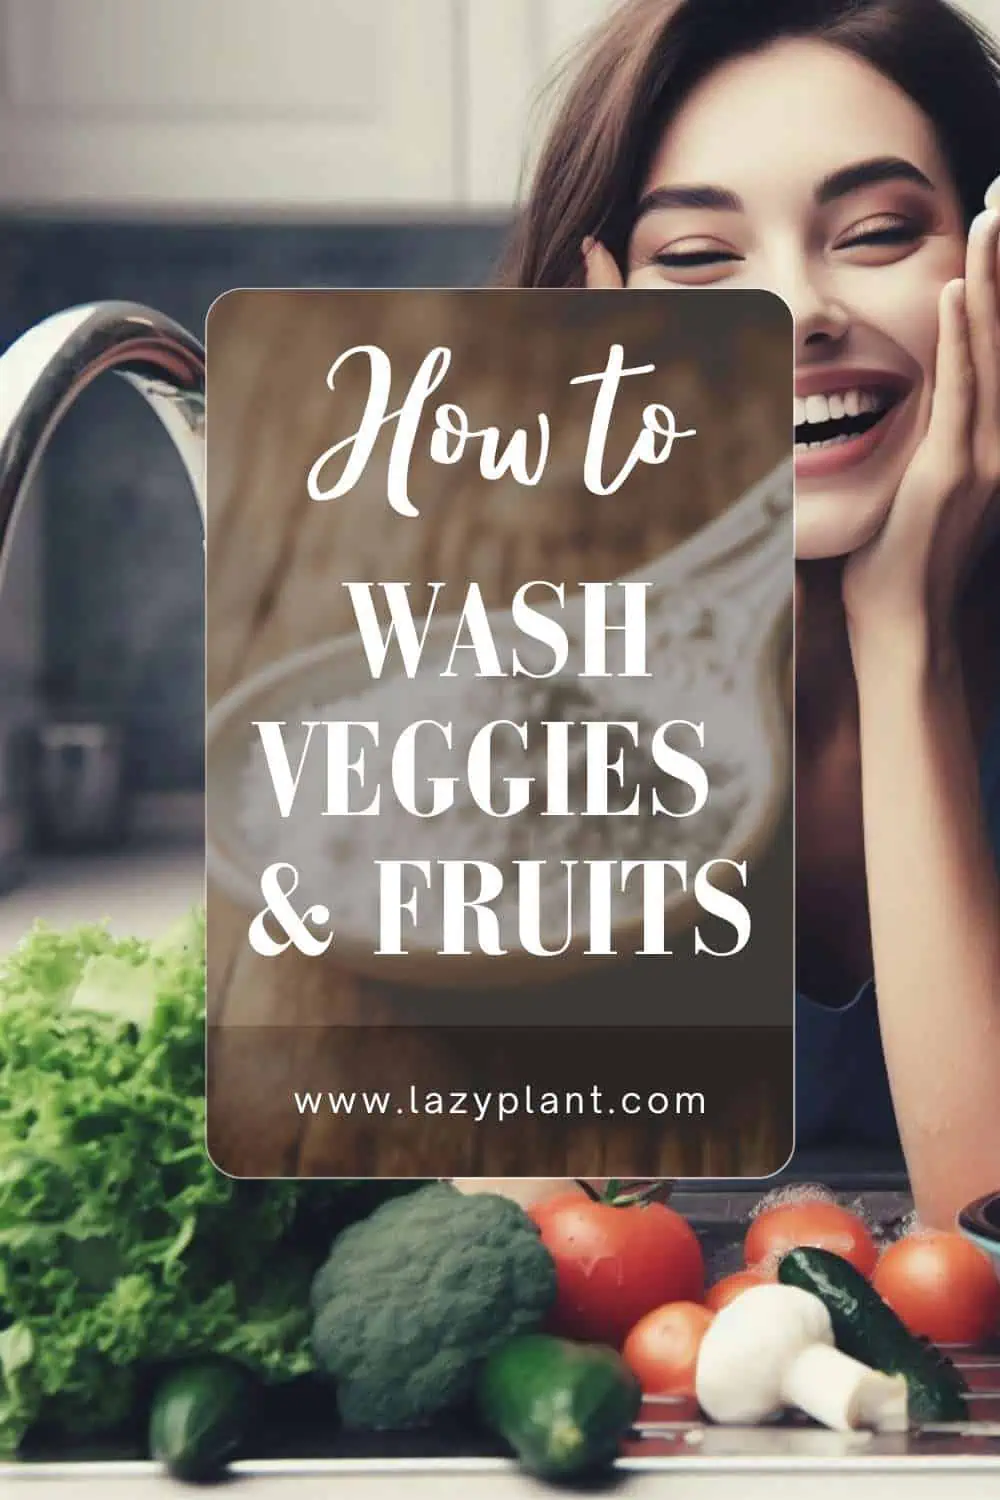 How to wash vegetables & fruits to remove pesticide residues?